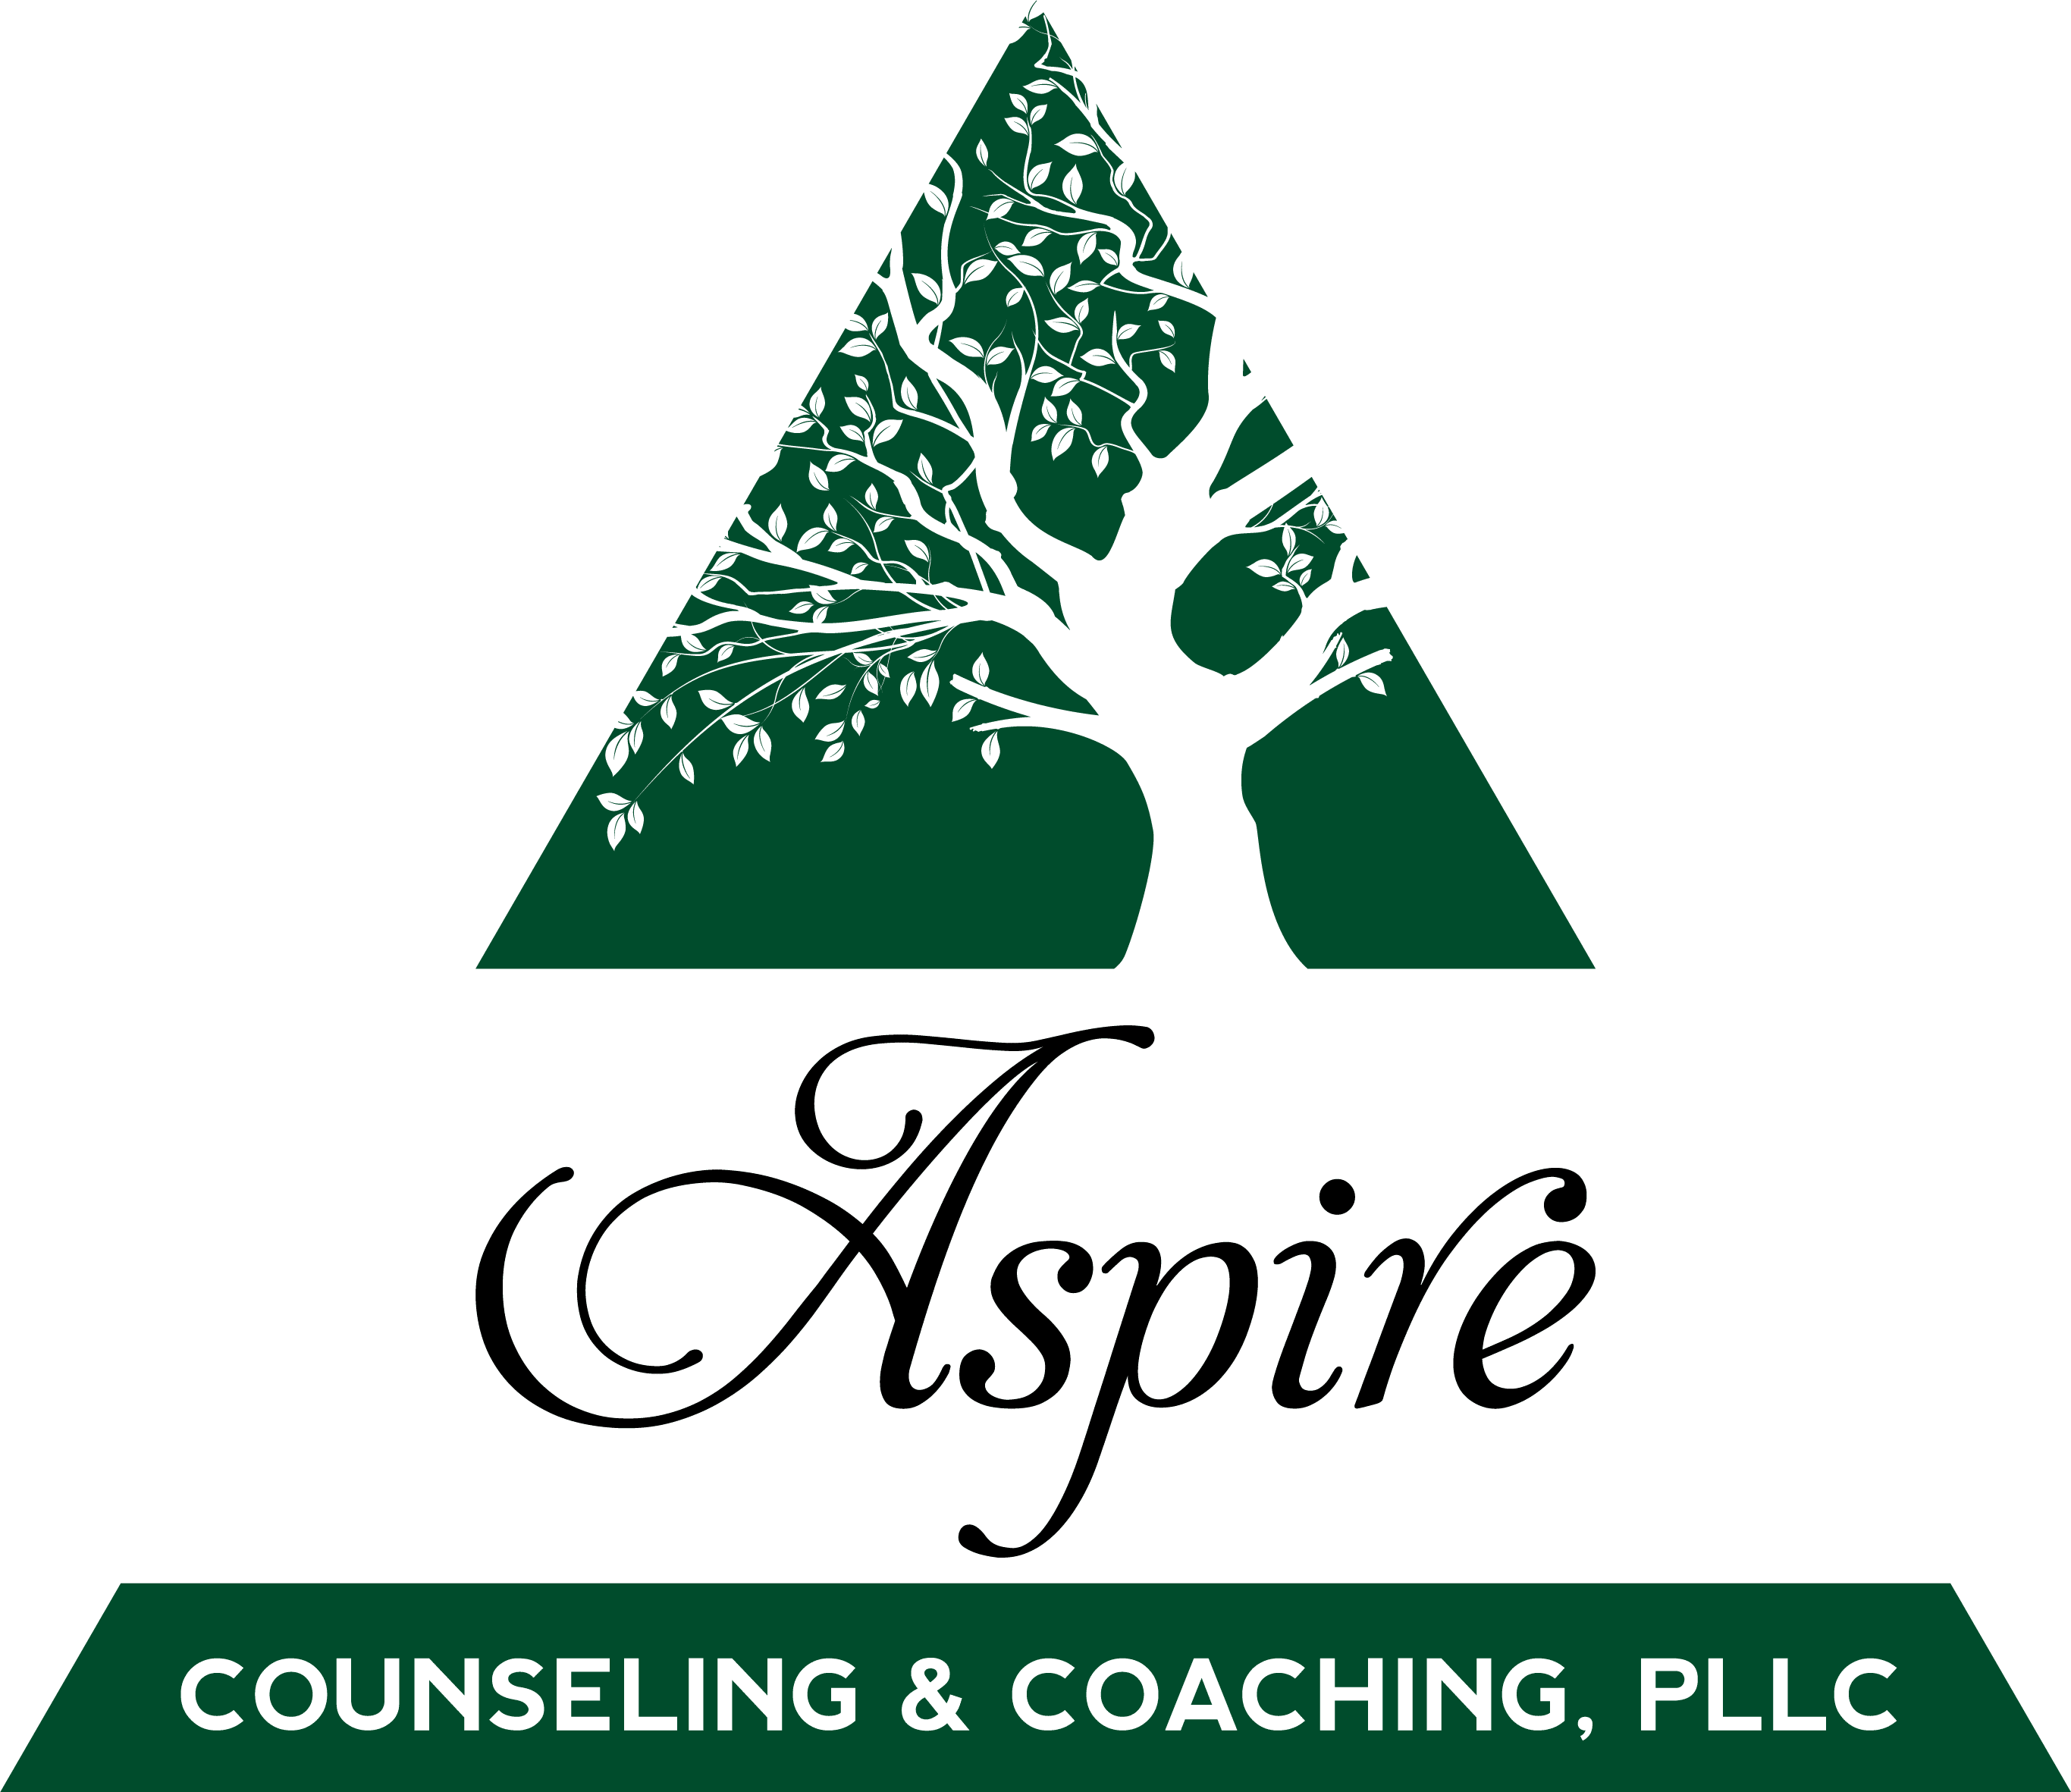 Aspire Counseling & Coaching, PLLC., Greenville, NC